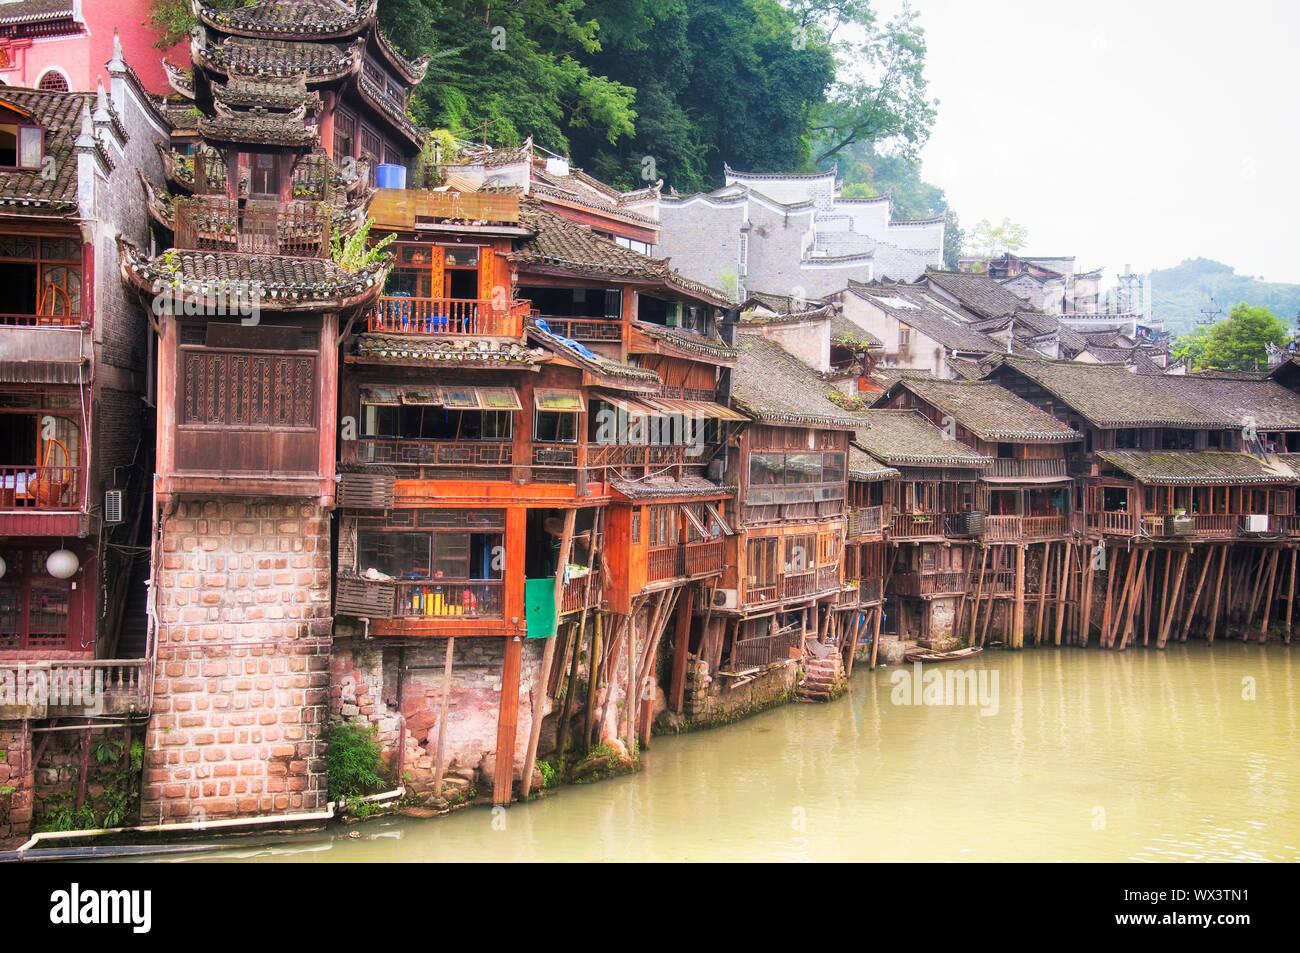 Unique chinese architecture and balconies on the banks of the Tuo Jiang River in Fenghuang ancient town in hunan province, china. Stock Photo